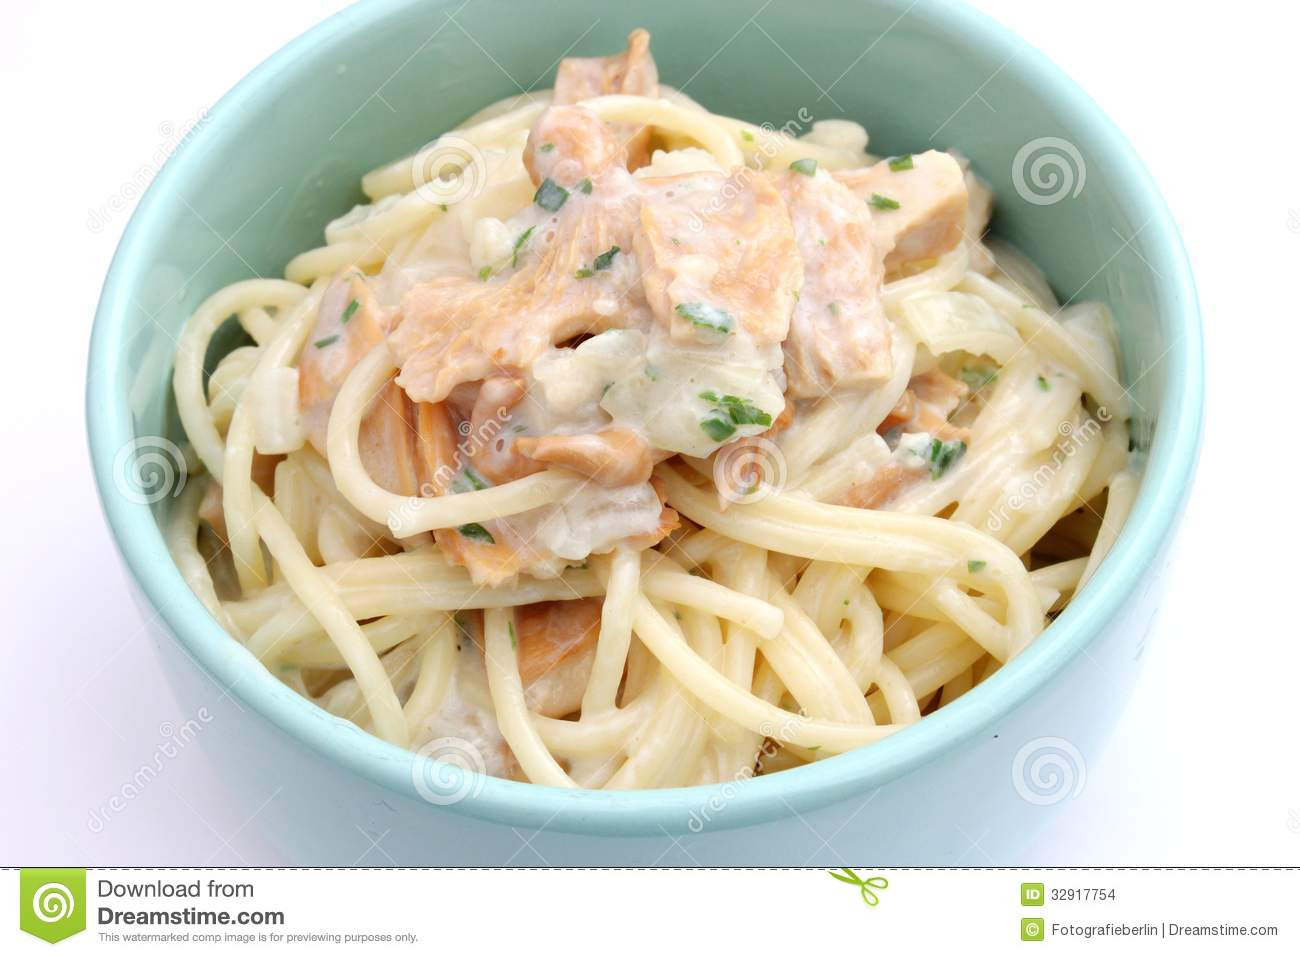 Tuna Fish And Noodles
 Noodles with tuna fish stock photo Image of italian